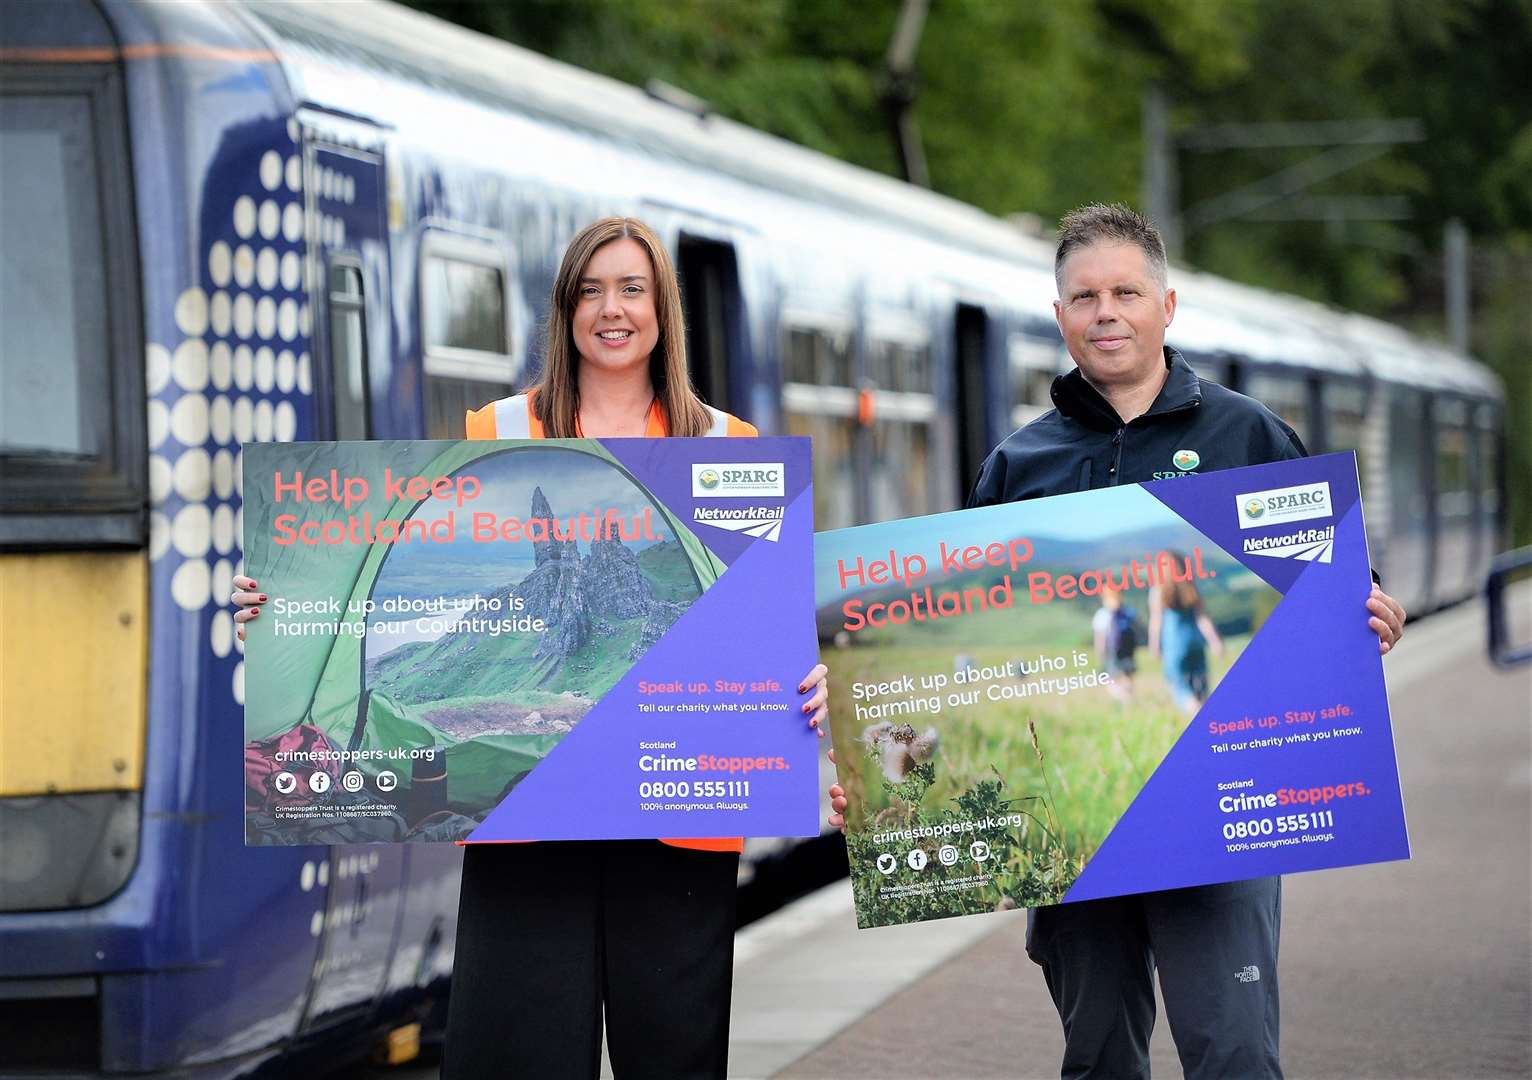 From left, Monica McGinley, from Network Rail and Inspector Alan Dron, from SPARC (Scottish Partnership Against Rural Crime) in Balloch, West Dunbartonshire, Scotland, to launch a campaign urging Scots to speak up about those harming our treasured countryside.